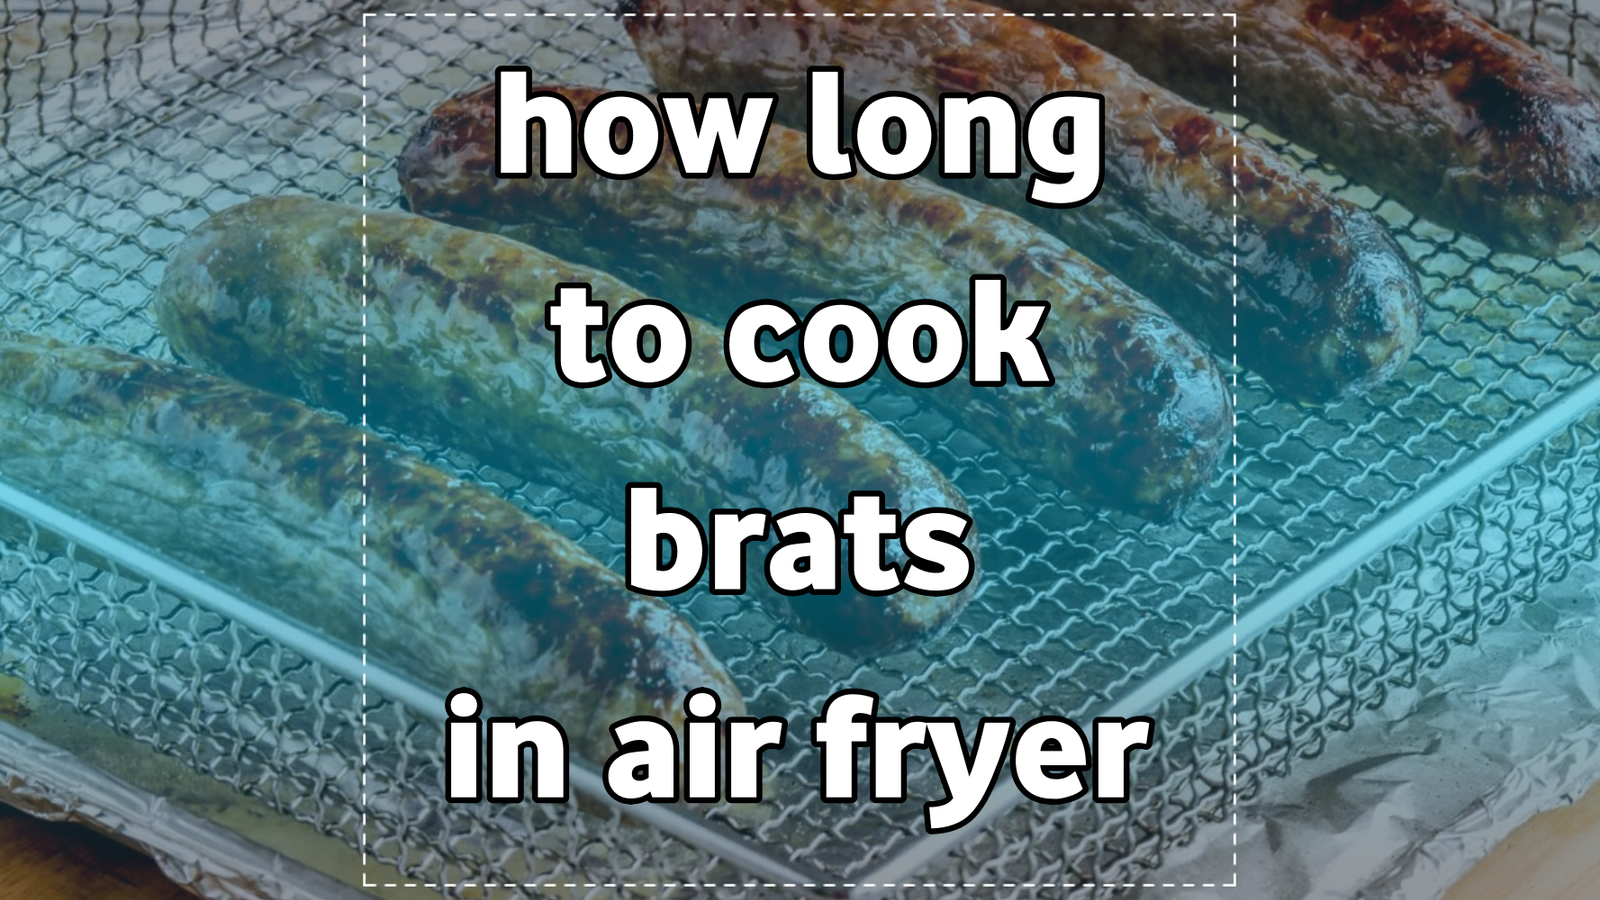 how long to cook brats in air fryer